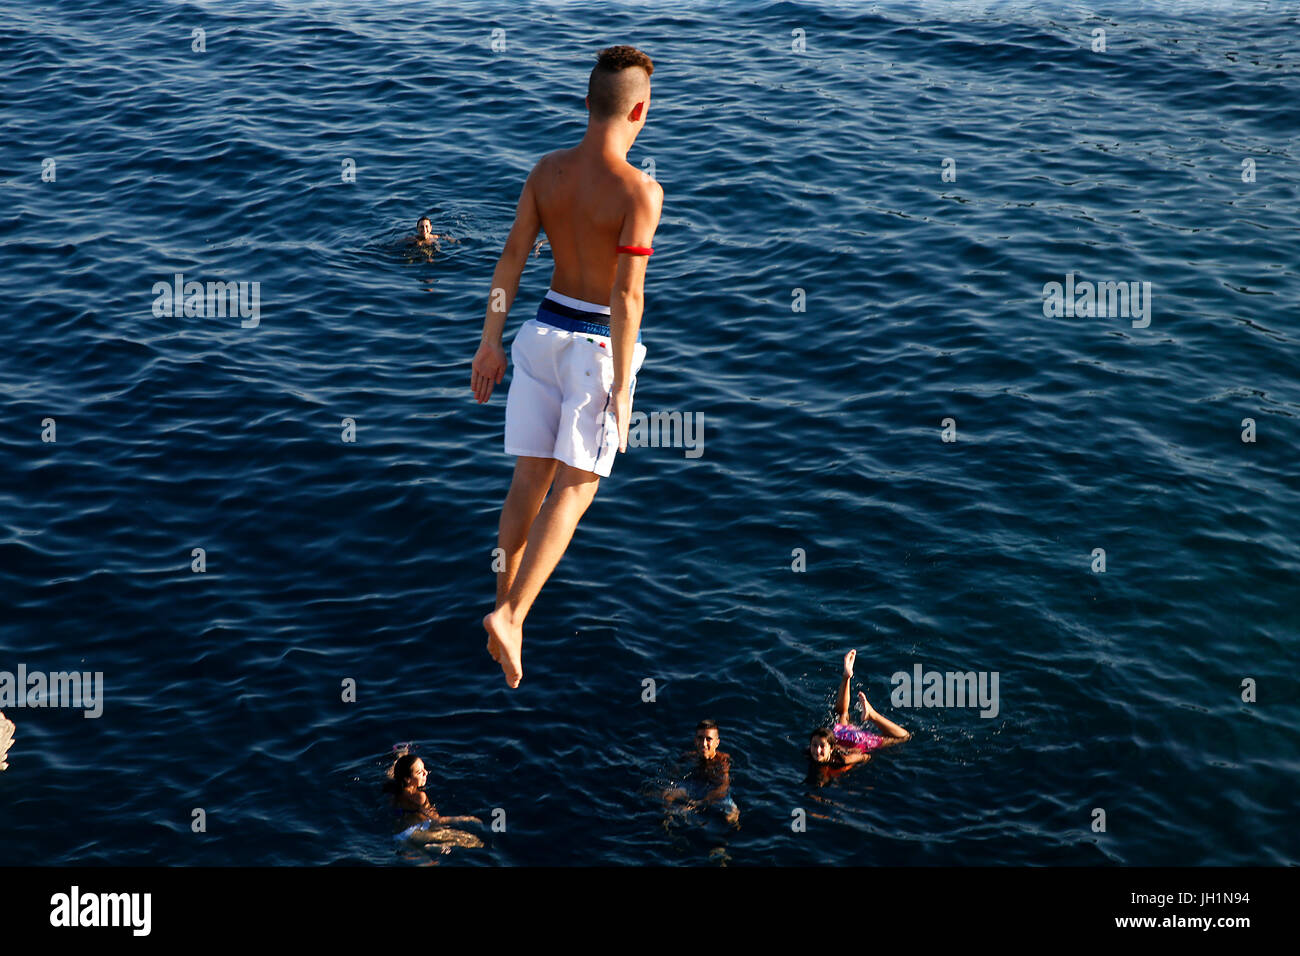 Young man jumping into the Med. Italy. Stock Photo